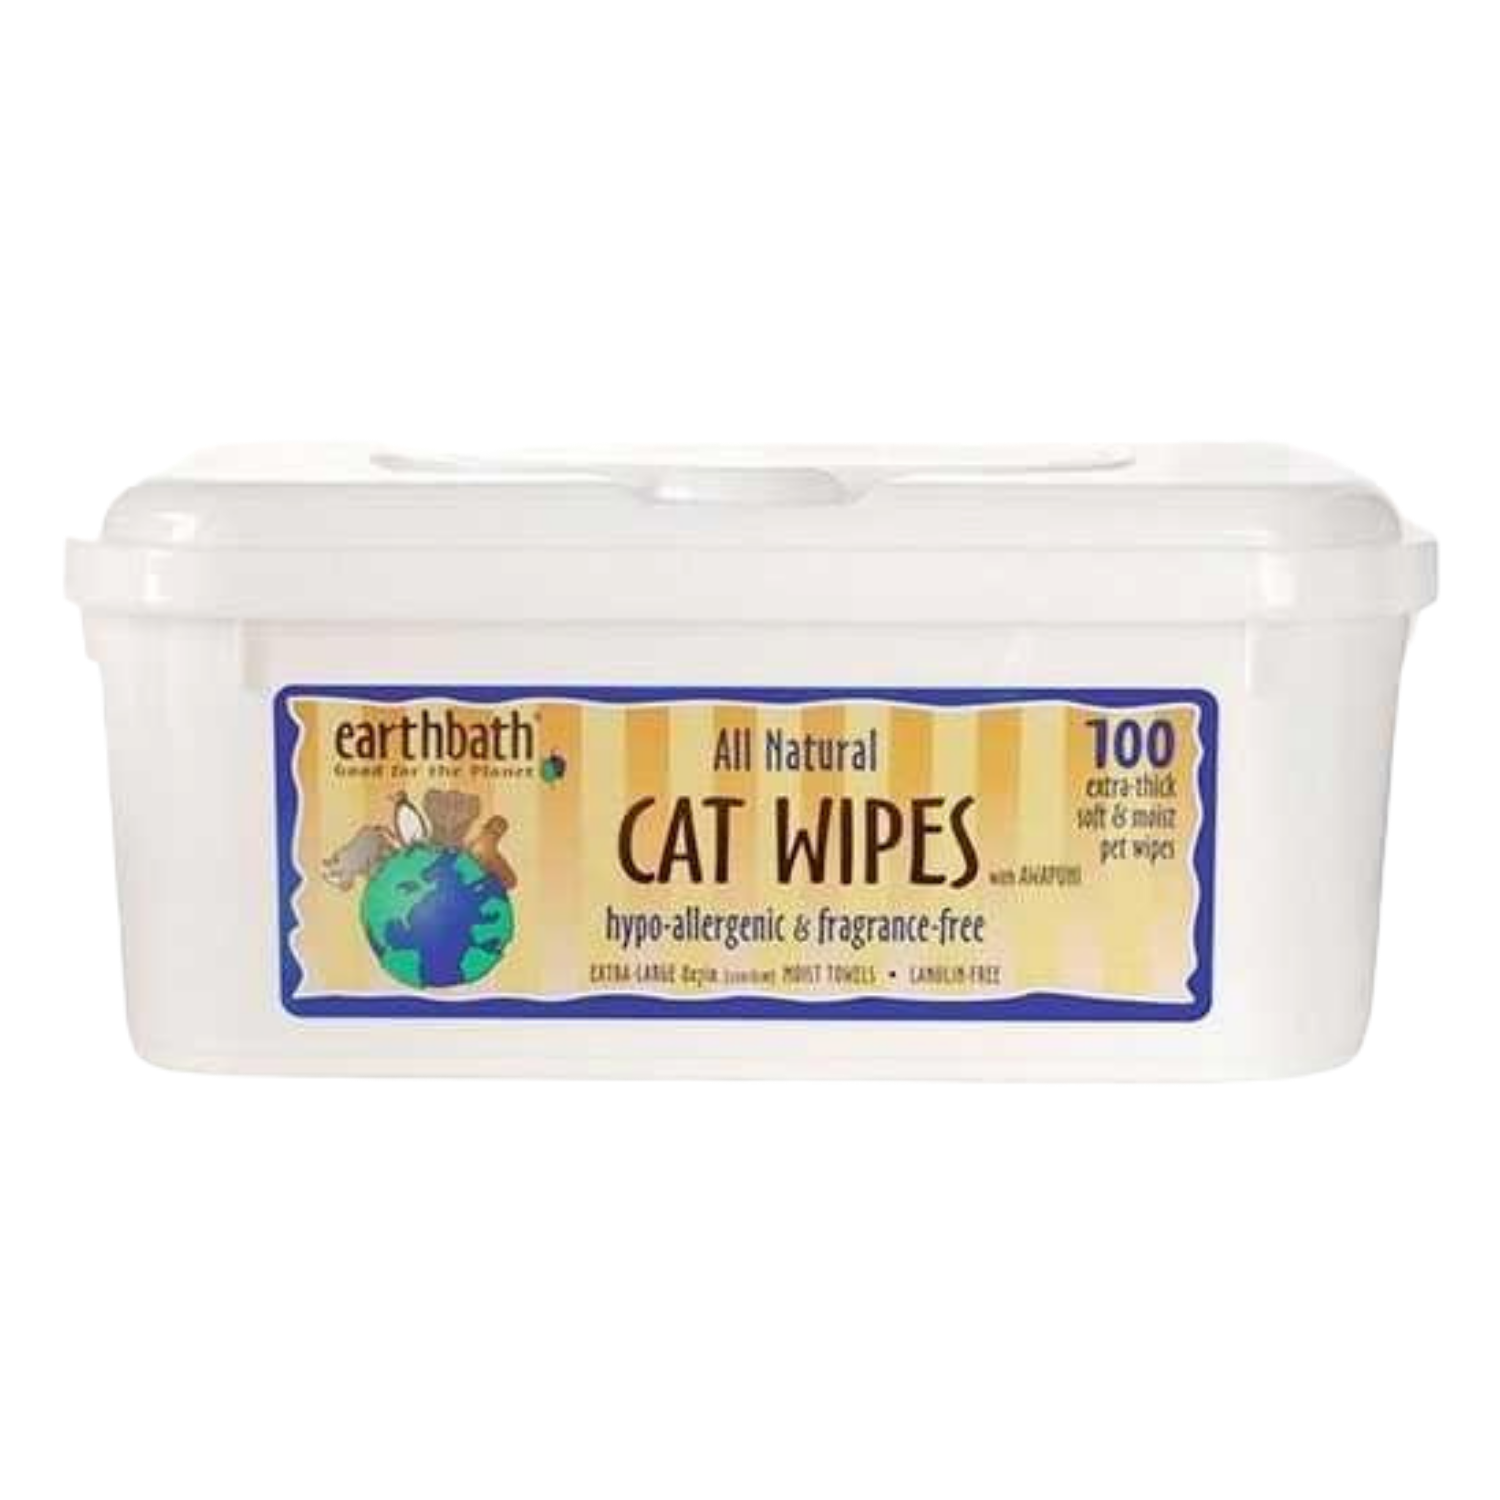 Earthbath All Natural Hypo-Allergenic Cat Wipes (Fragrance Free) - 100 Wipes